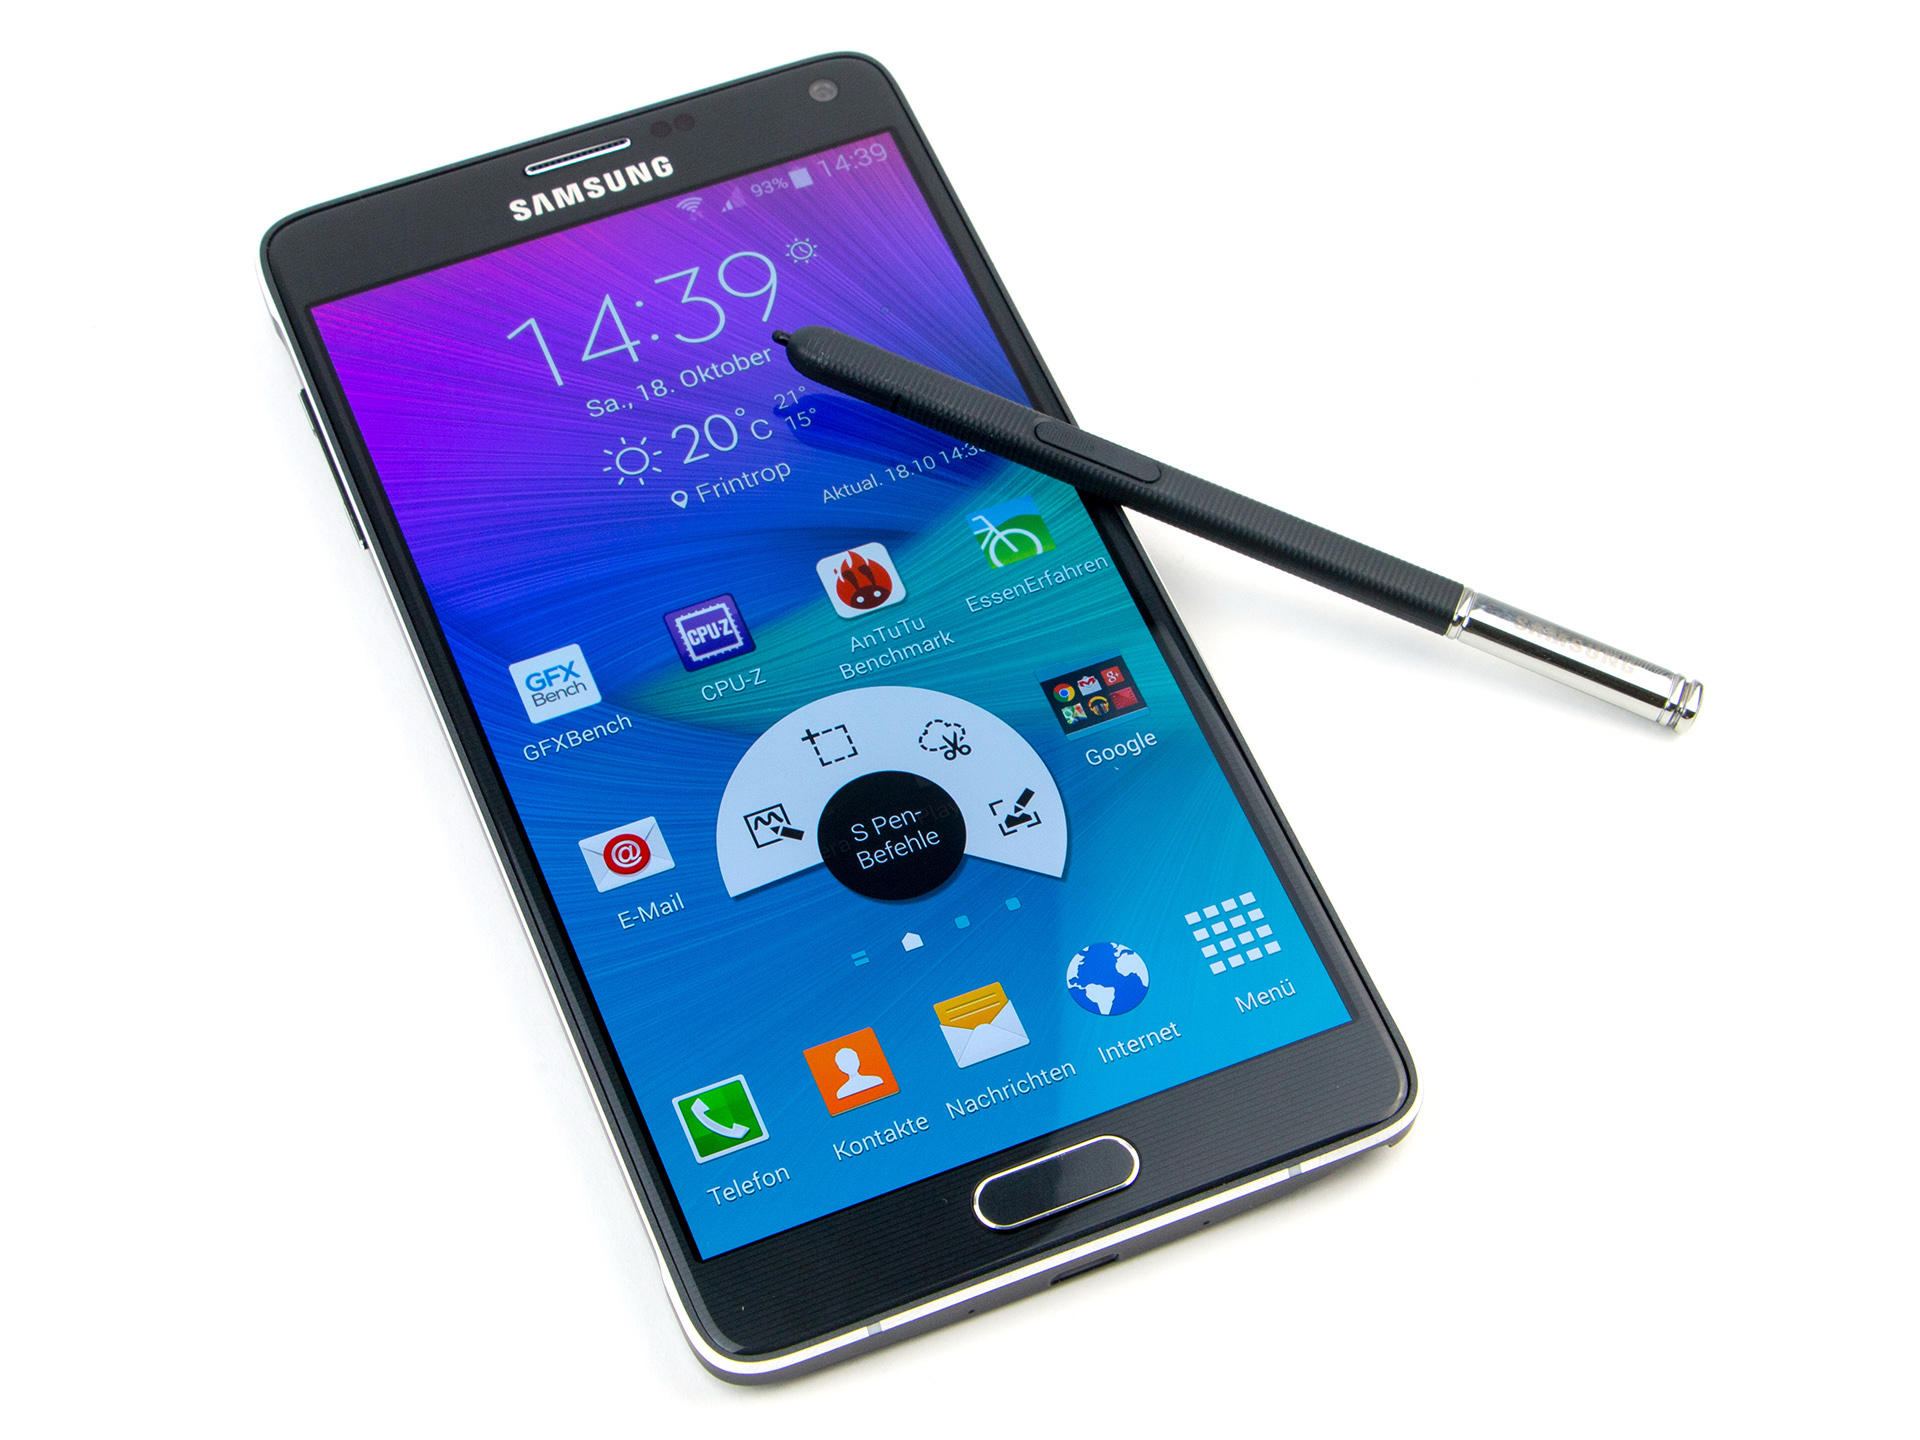 Video: Samsung Galaxy Note 4 Unboxing